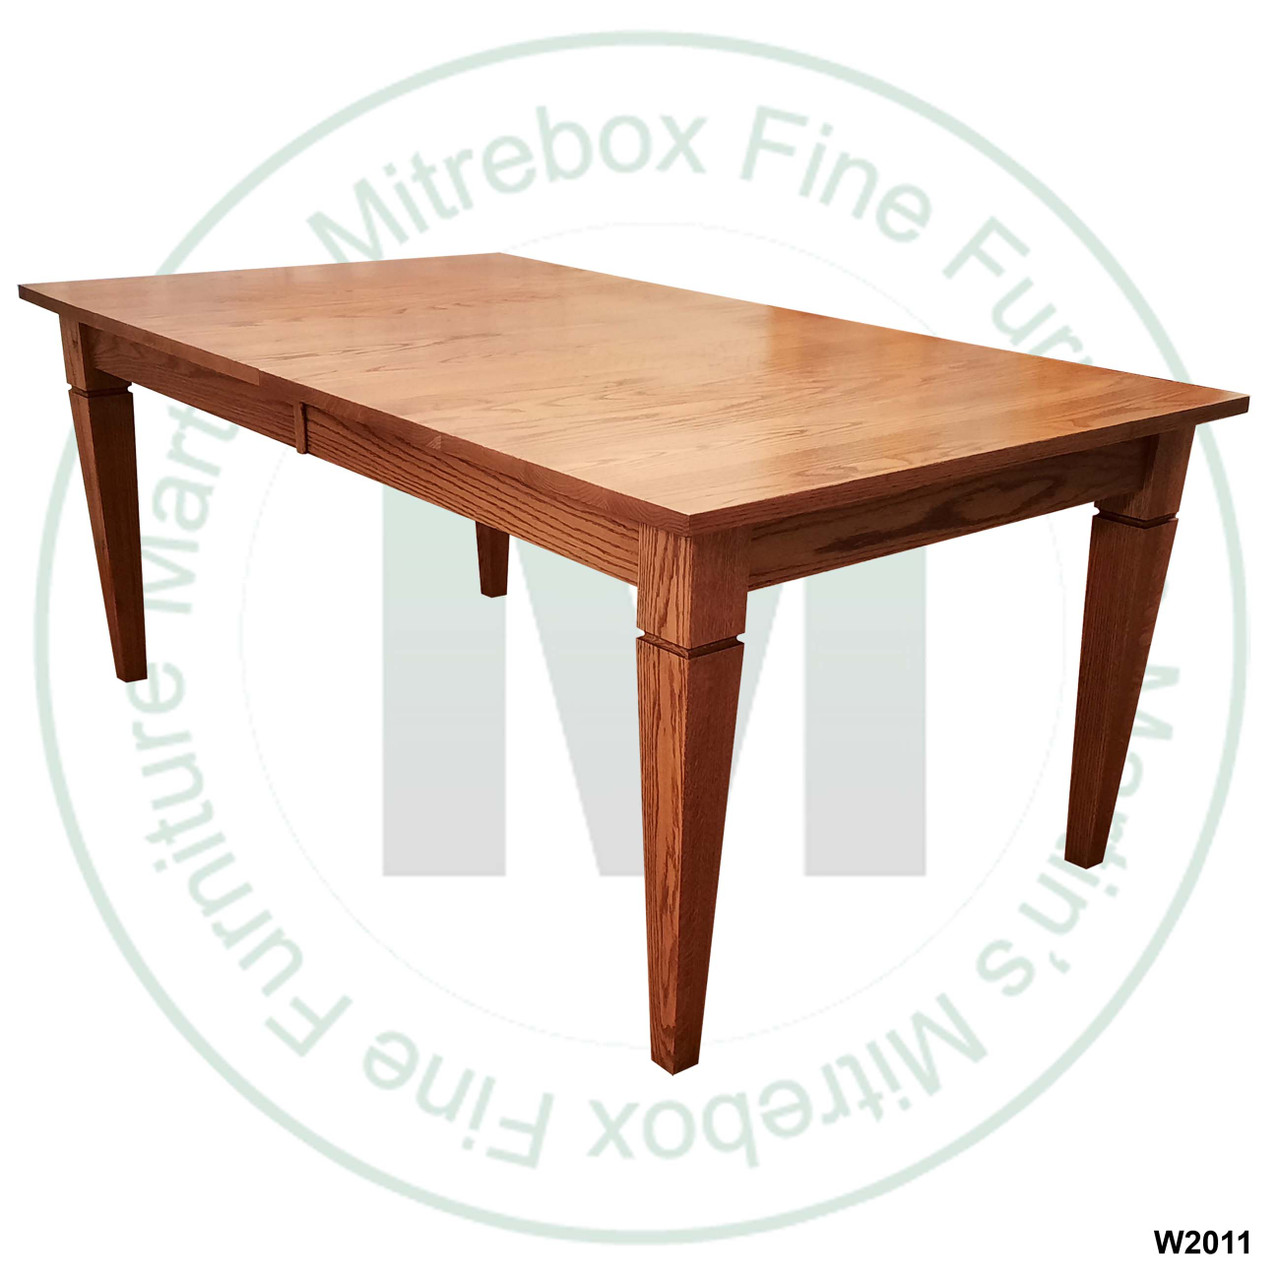 Oak Reesor Solid Top Harvest Table 48''D x 96''W x 30''H Table Has 1 3/4'' Thick Top And 2 - 16'' Extensions